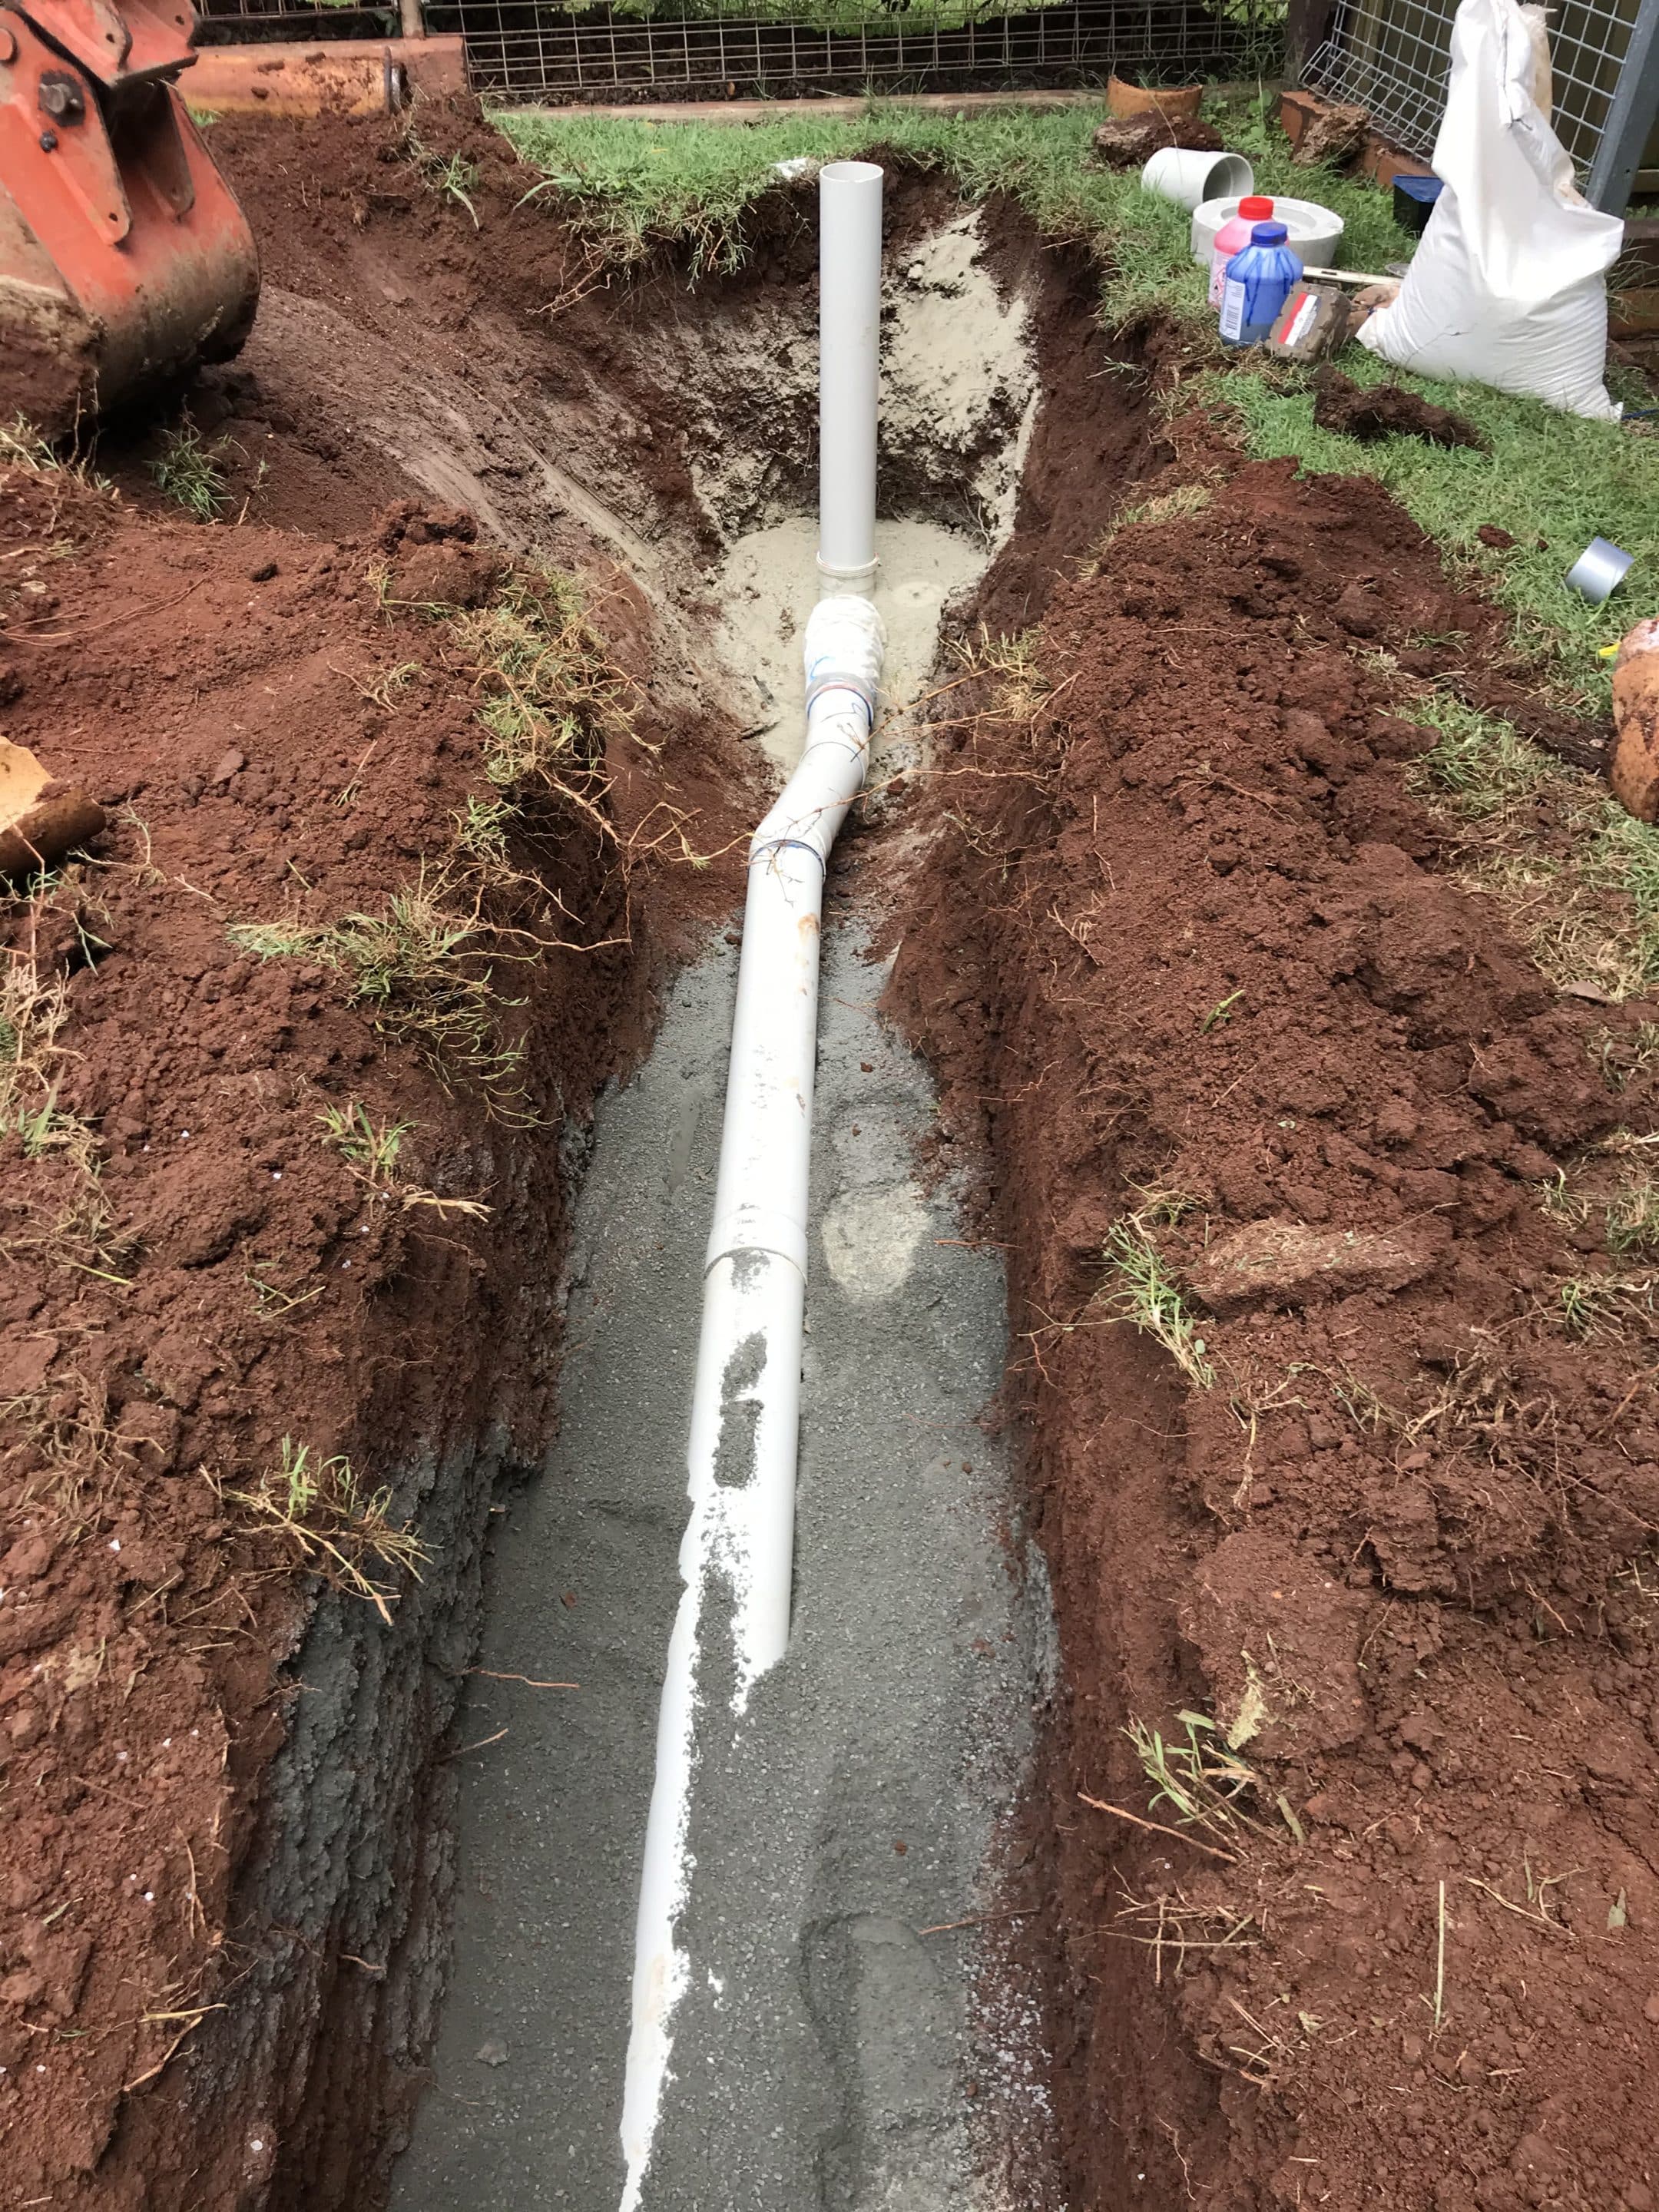 Replacement Plumbing Pipe In-ground — Just Plumbing Group Pty Ltd In Toowoomba, QLD